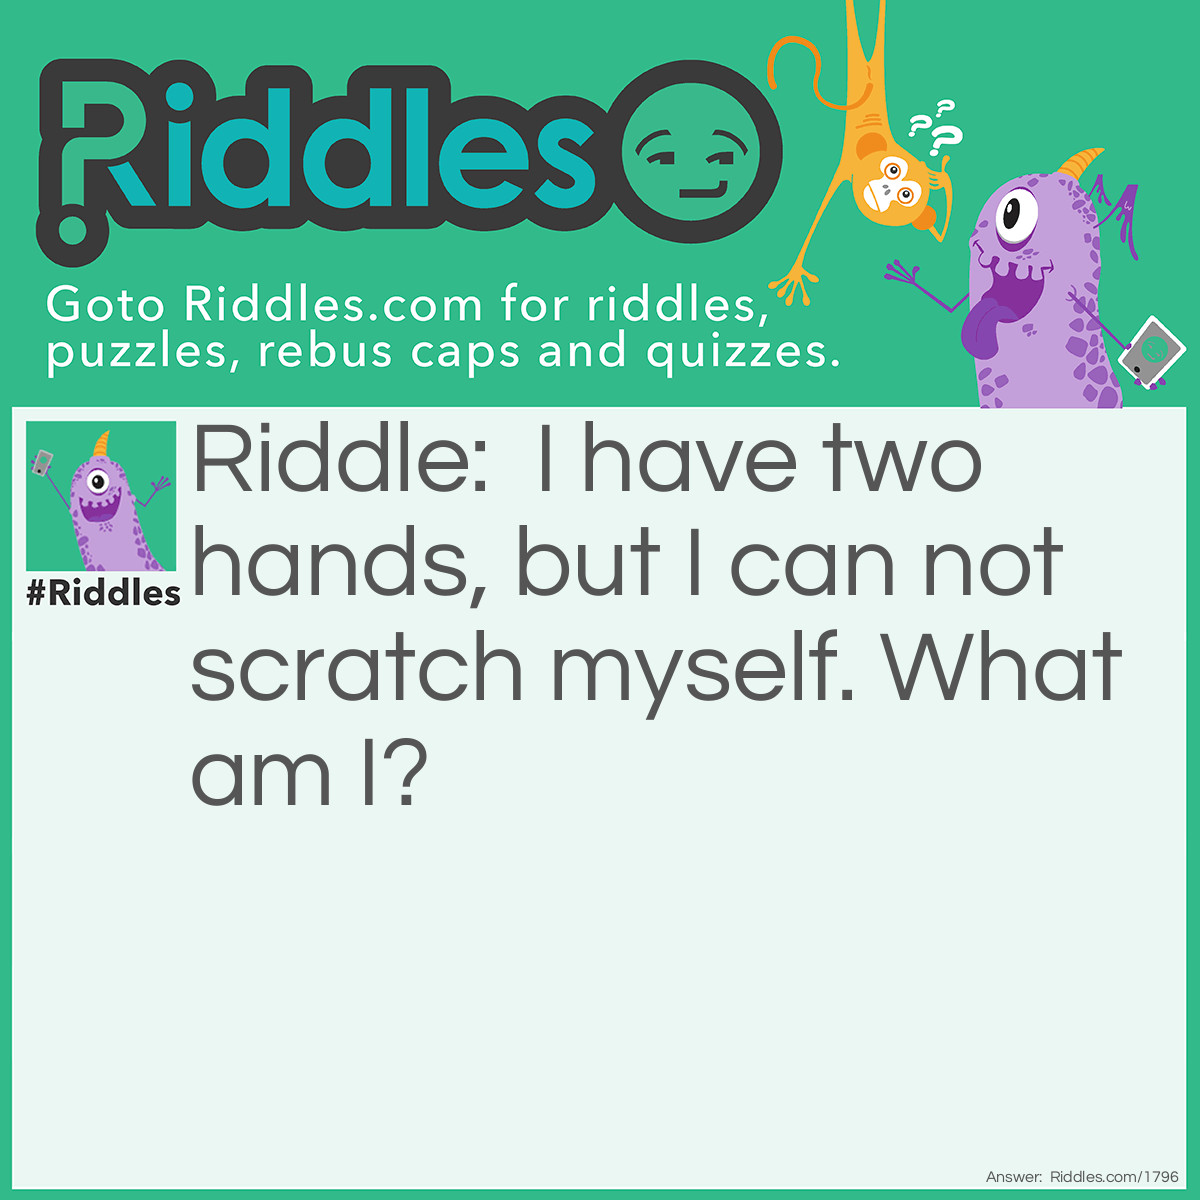 Riddle: I have two hands, but I can not scratch myself. What am I? Answer: A clock.